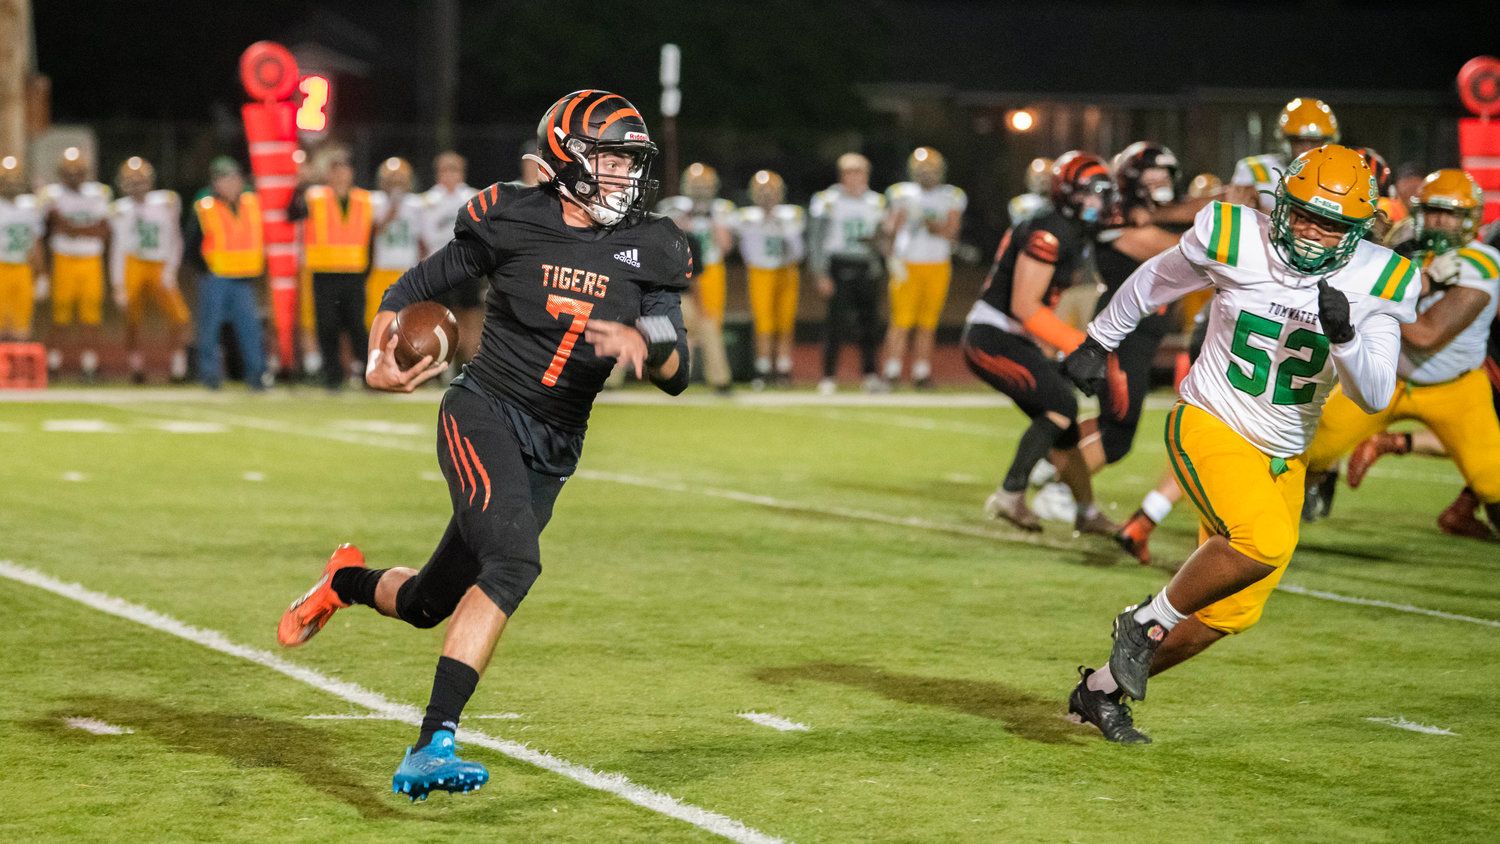 Centralia senior Tommy Billings (7) looks upfield with the football during a game against Tumwater Friday night.